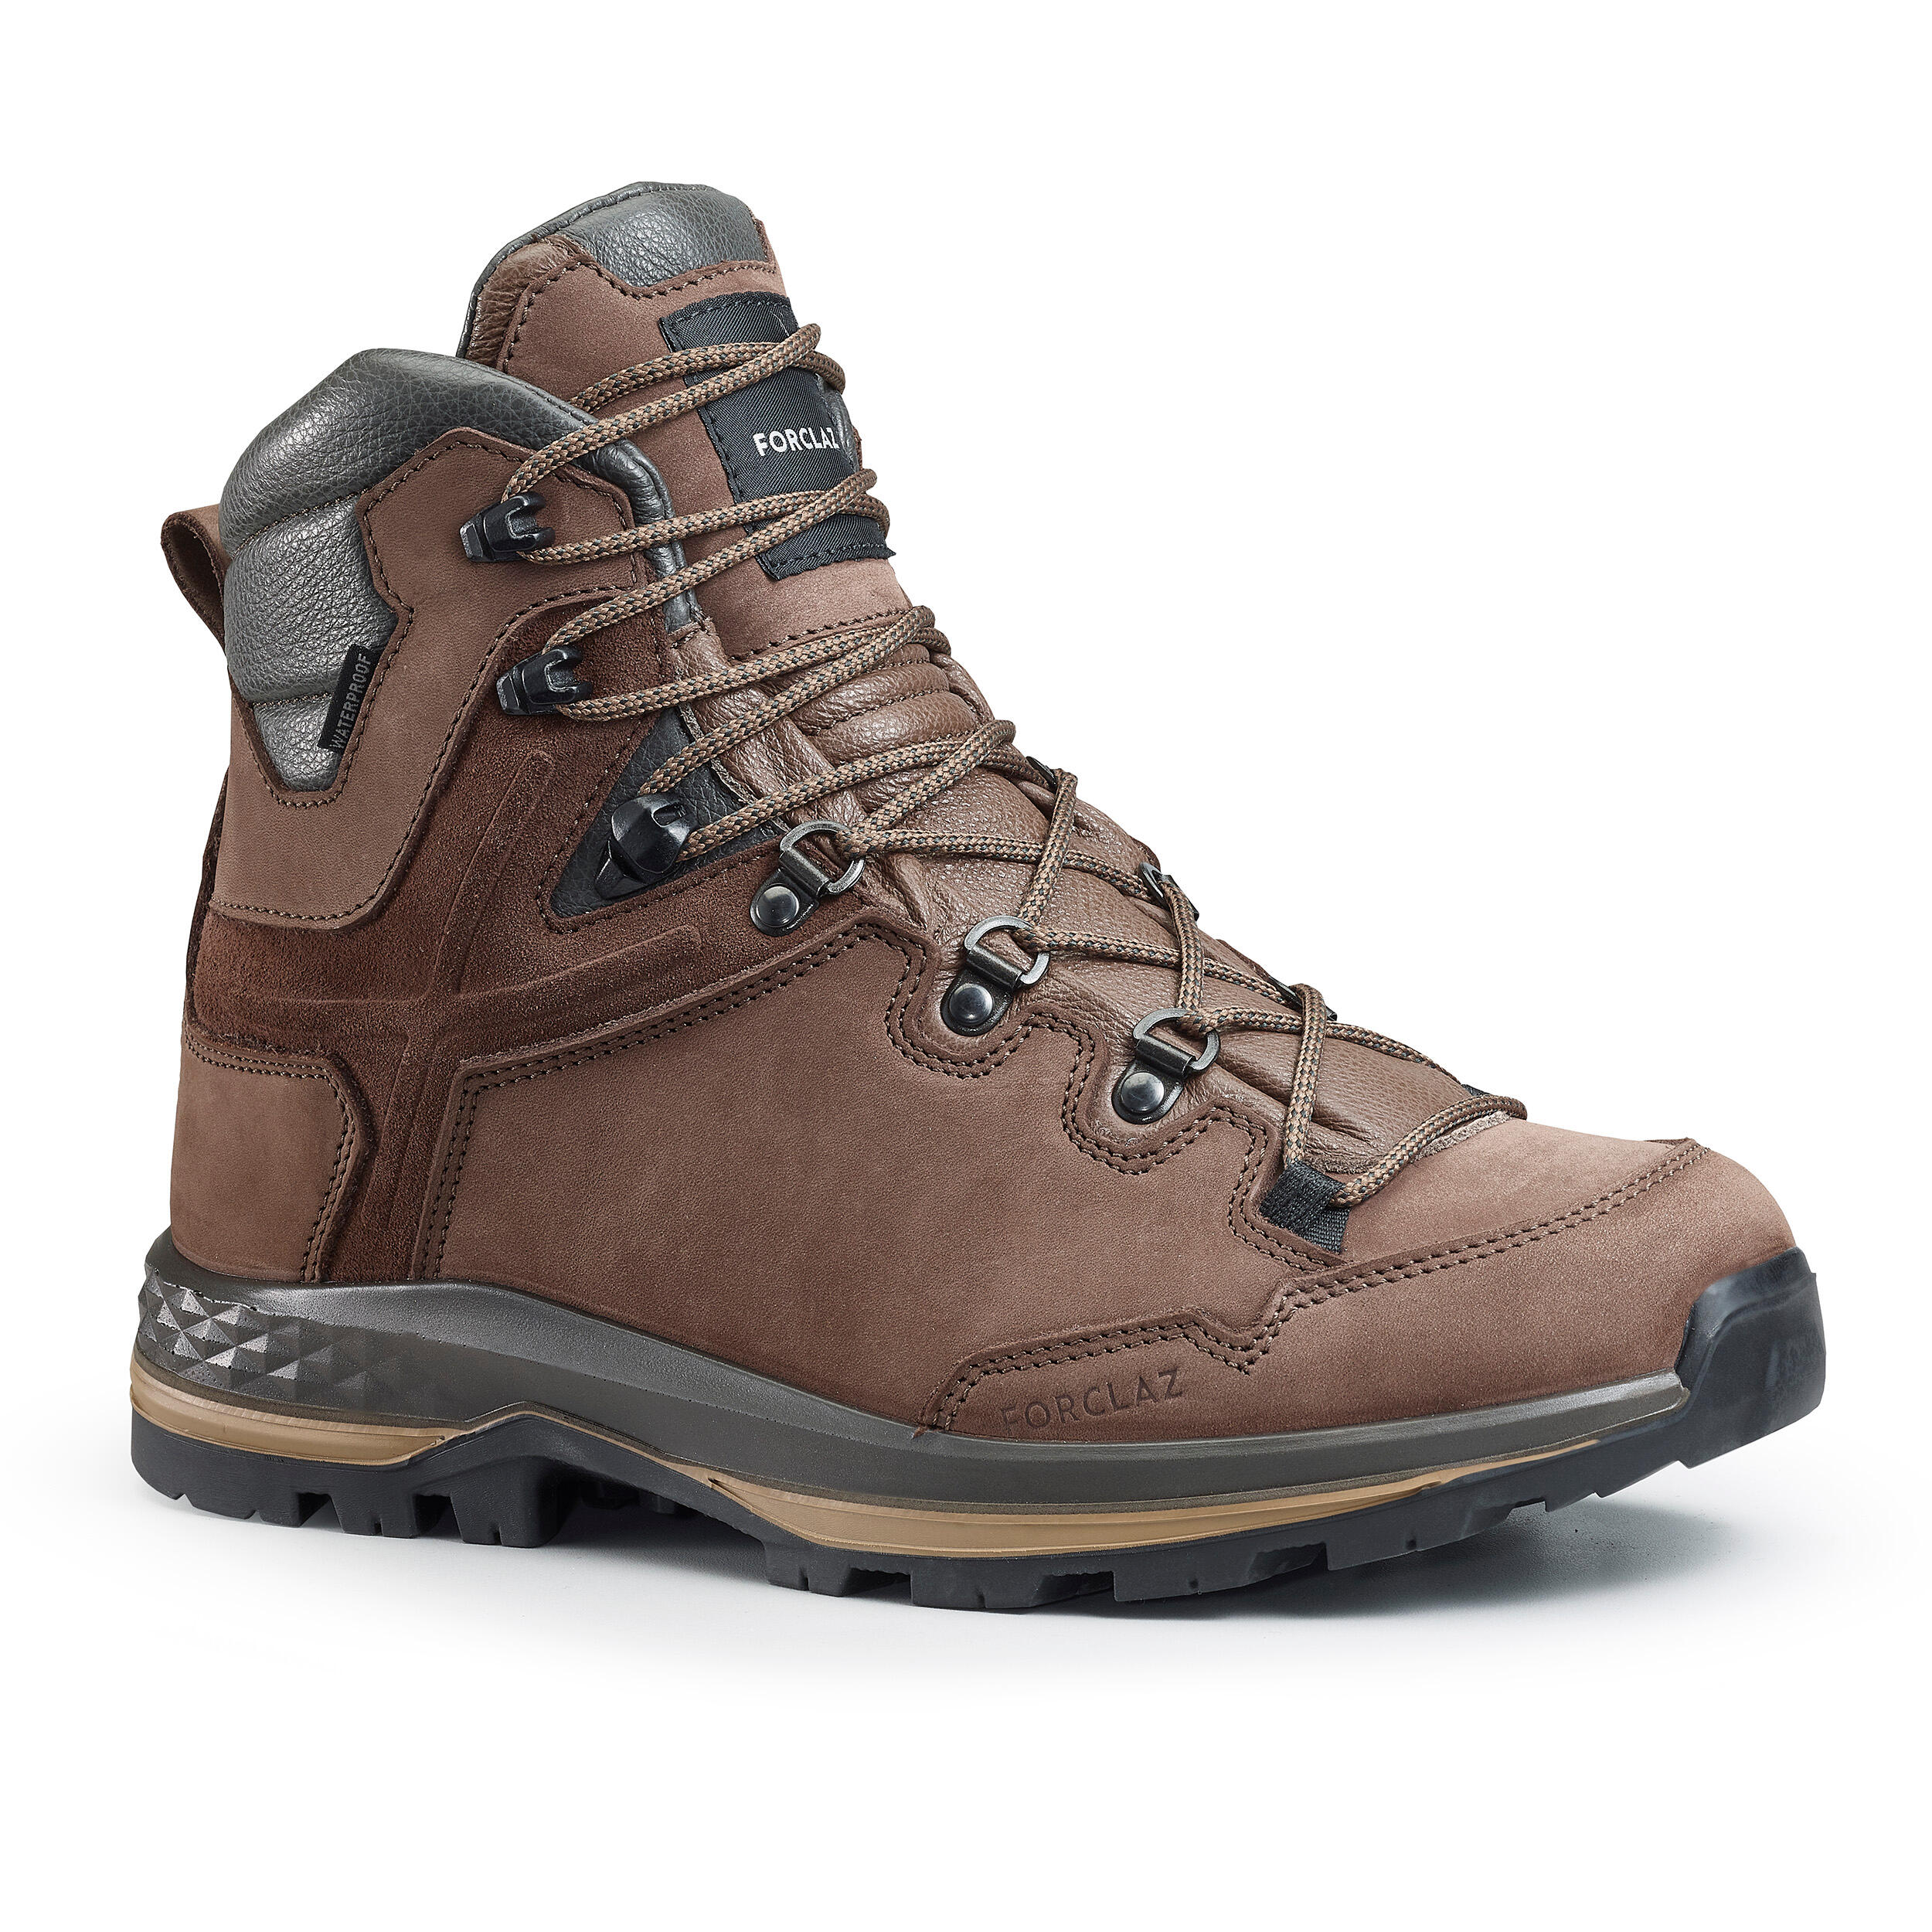 M High Boot - Leather - Waterproof - Contact® - Alltrail MT5